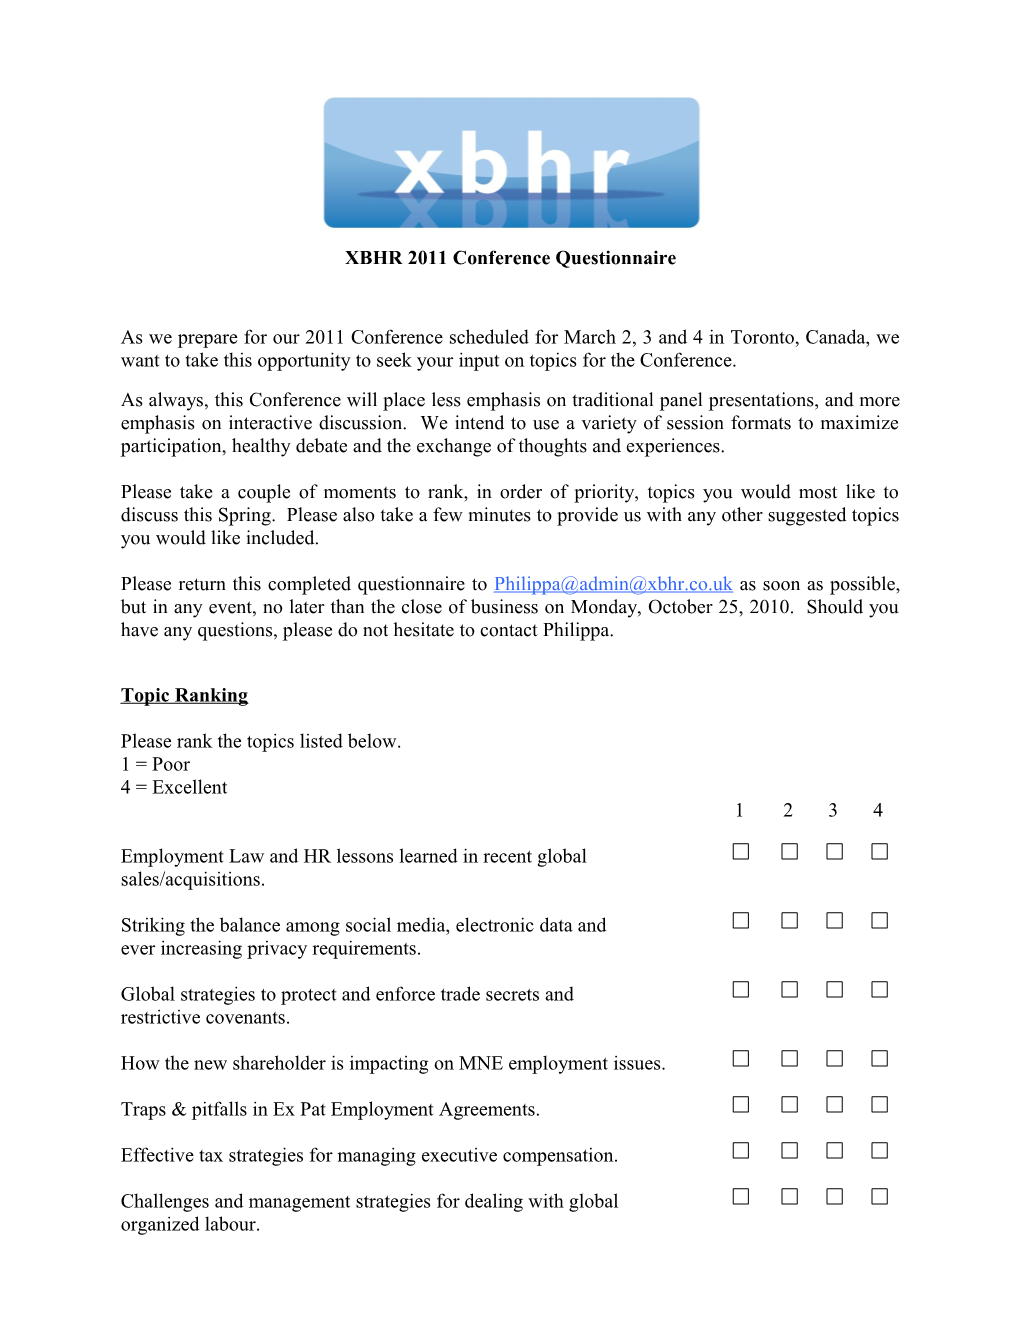 XBHR 2011 Conference Questionnaire